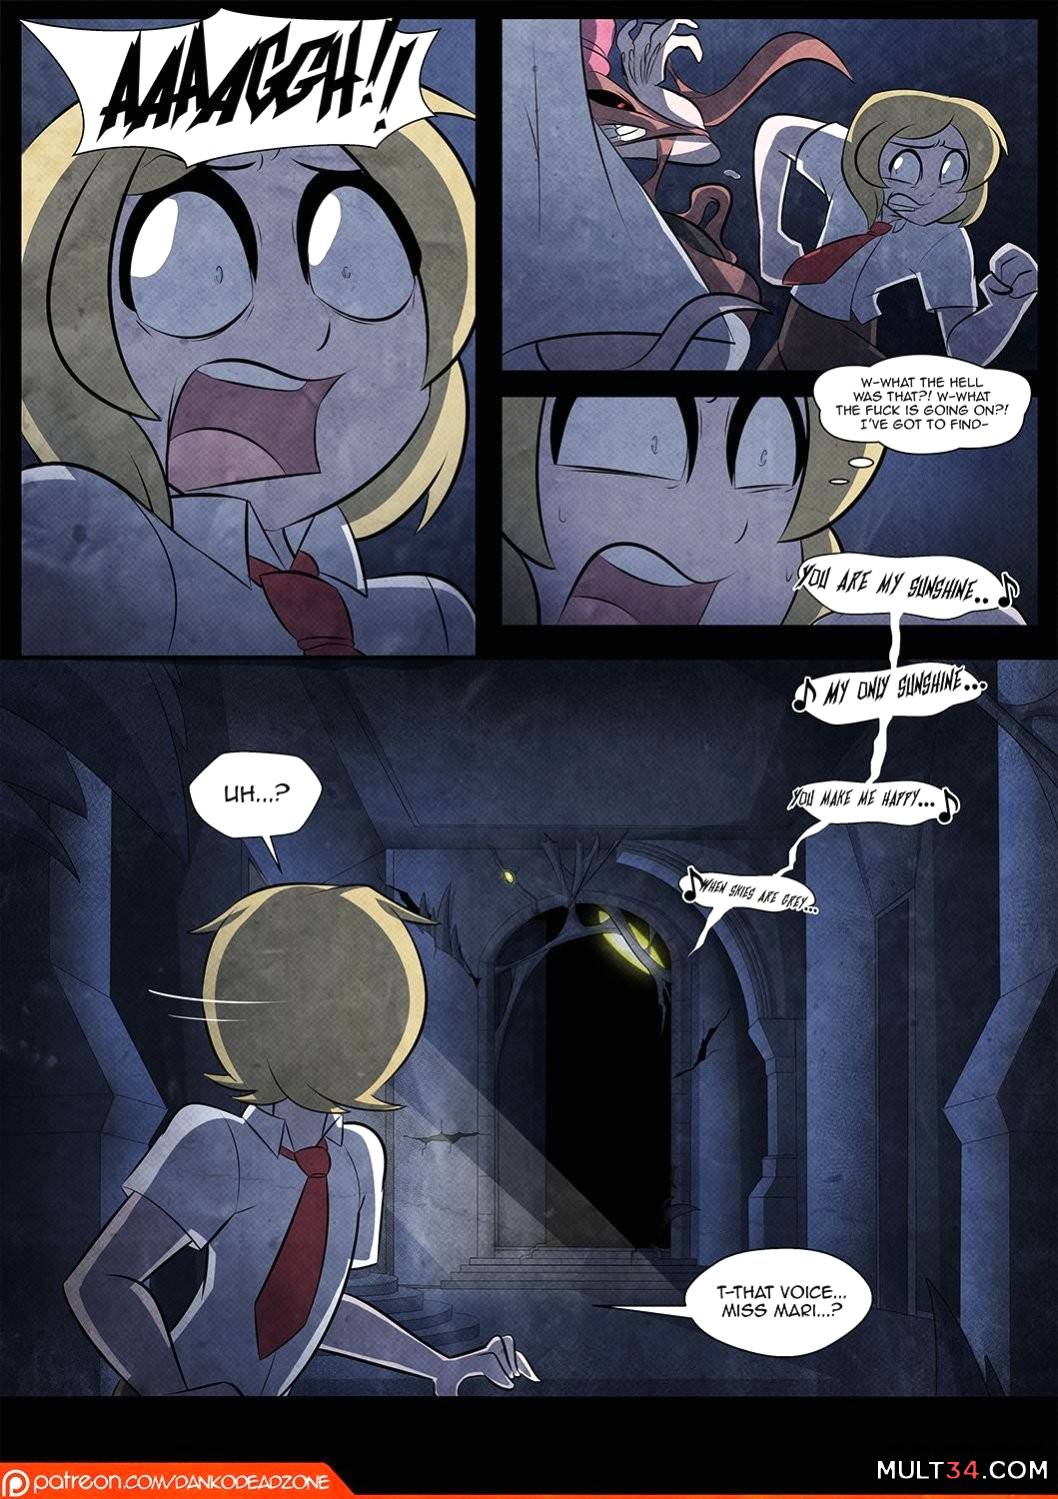 Lady of the Night - Issue 0 page 19